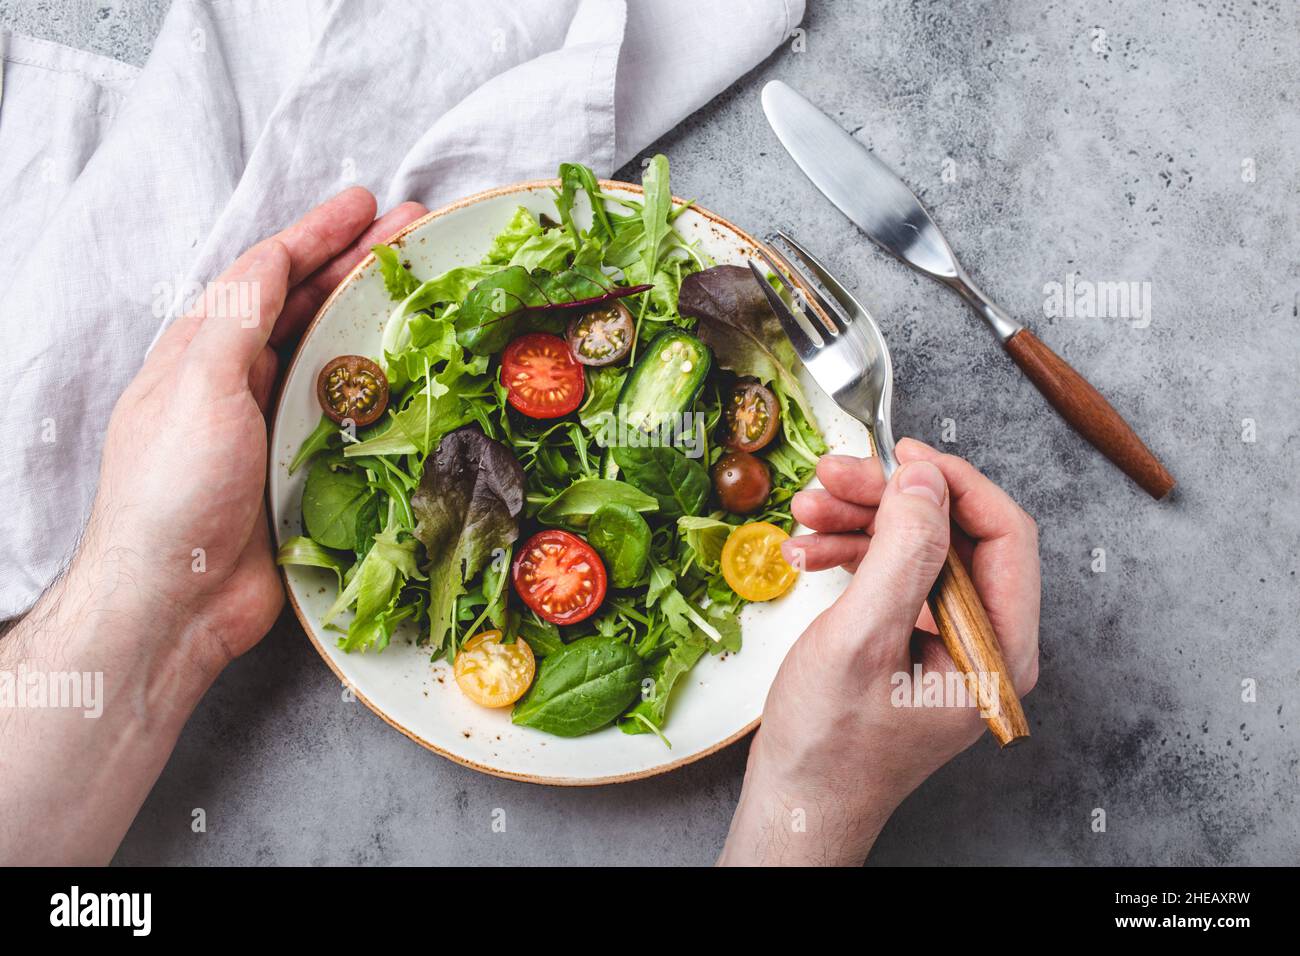 Man eating vegetarian vegetables healthy salad with red and yellow cherry tomatoes Stock Photo